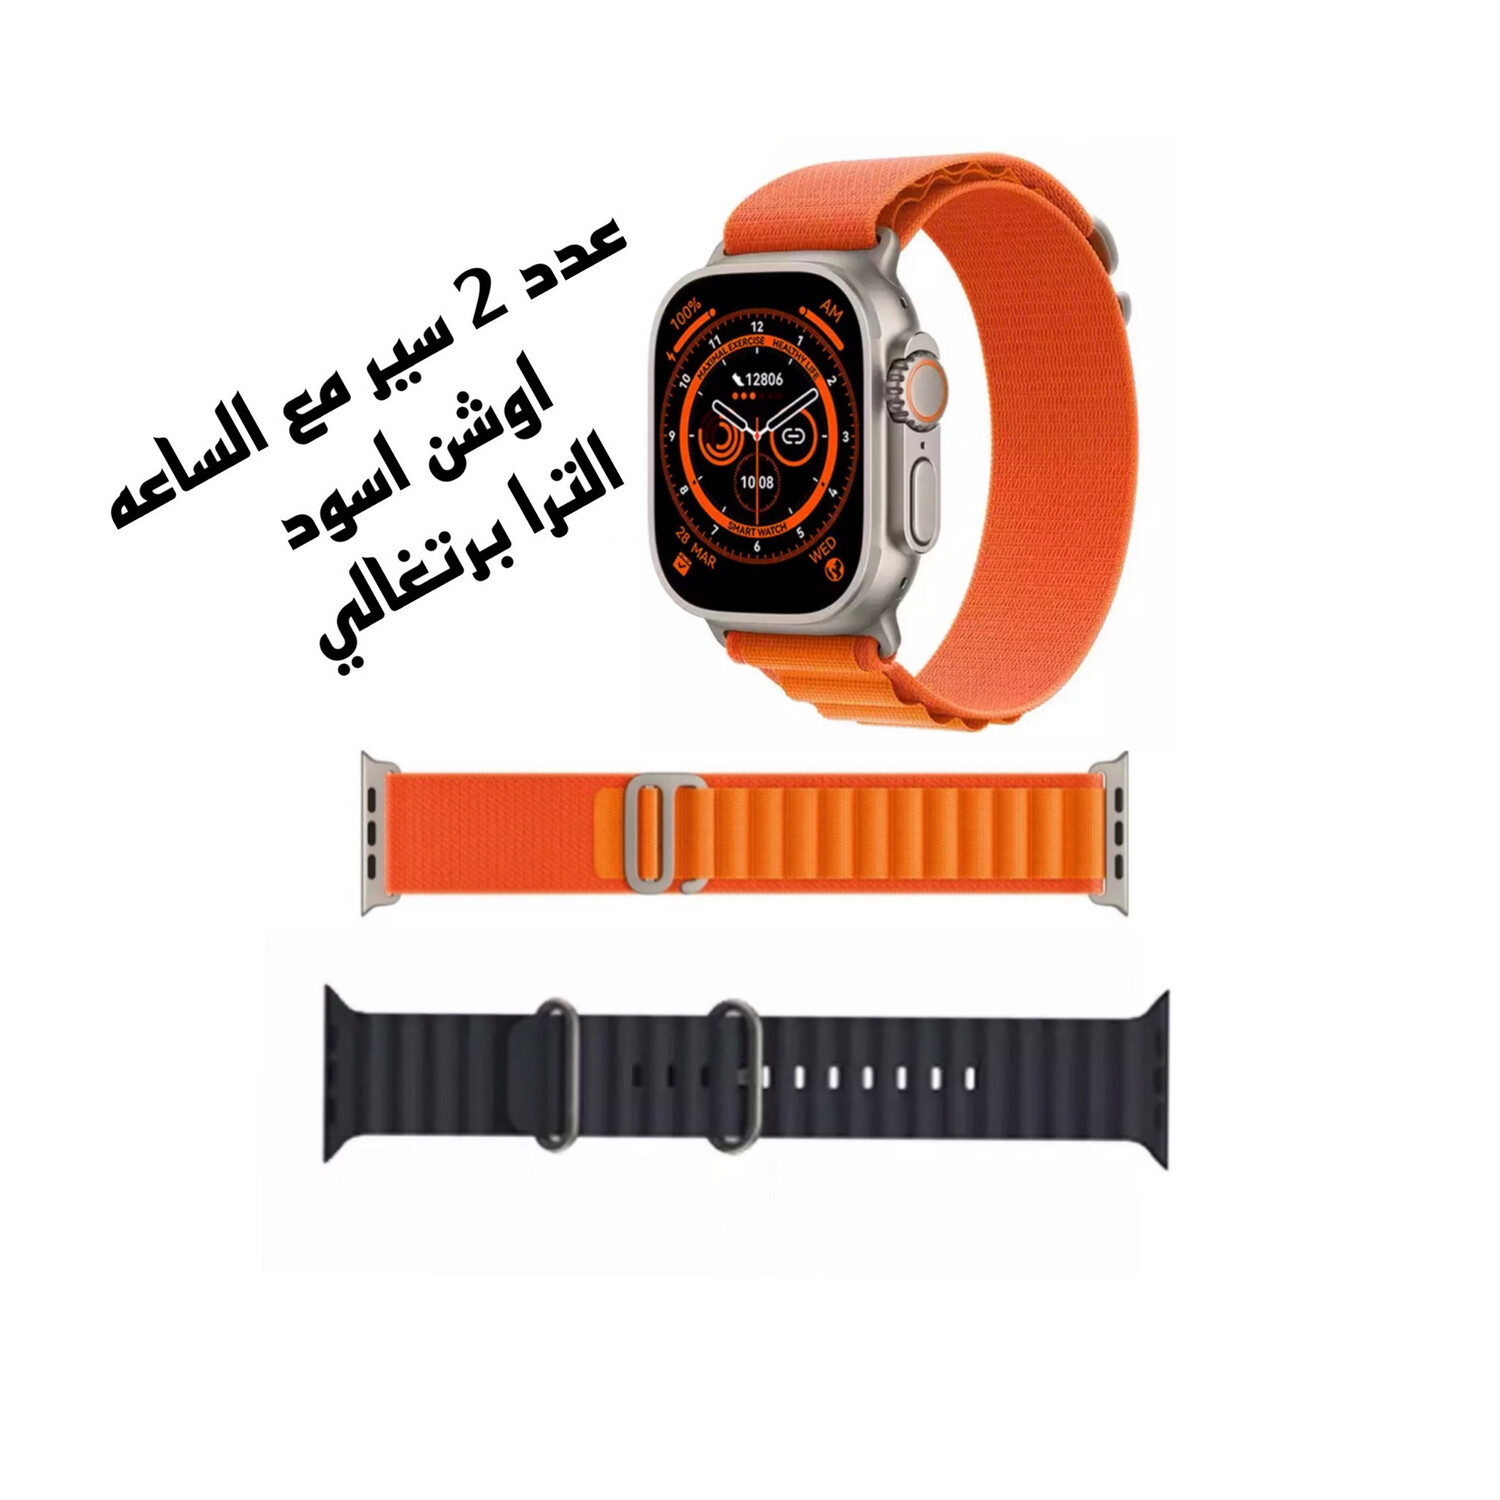 German haino teko watch similar to Apple Ultra, size 49, with black pand Ocean, and a orange pand Ultra